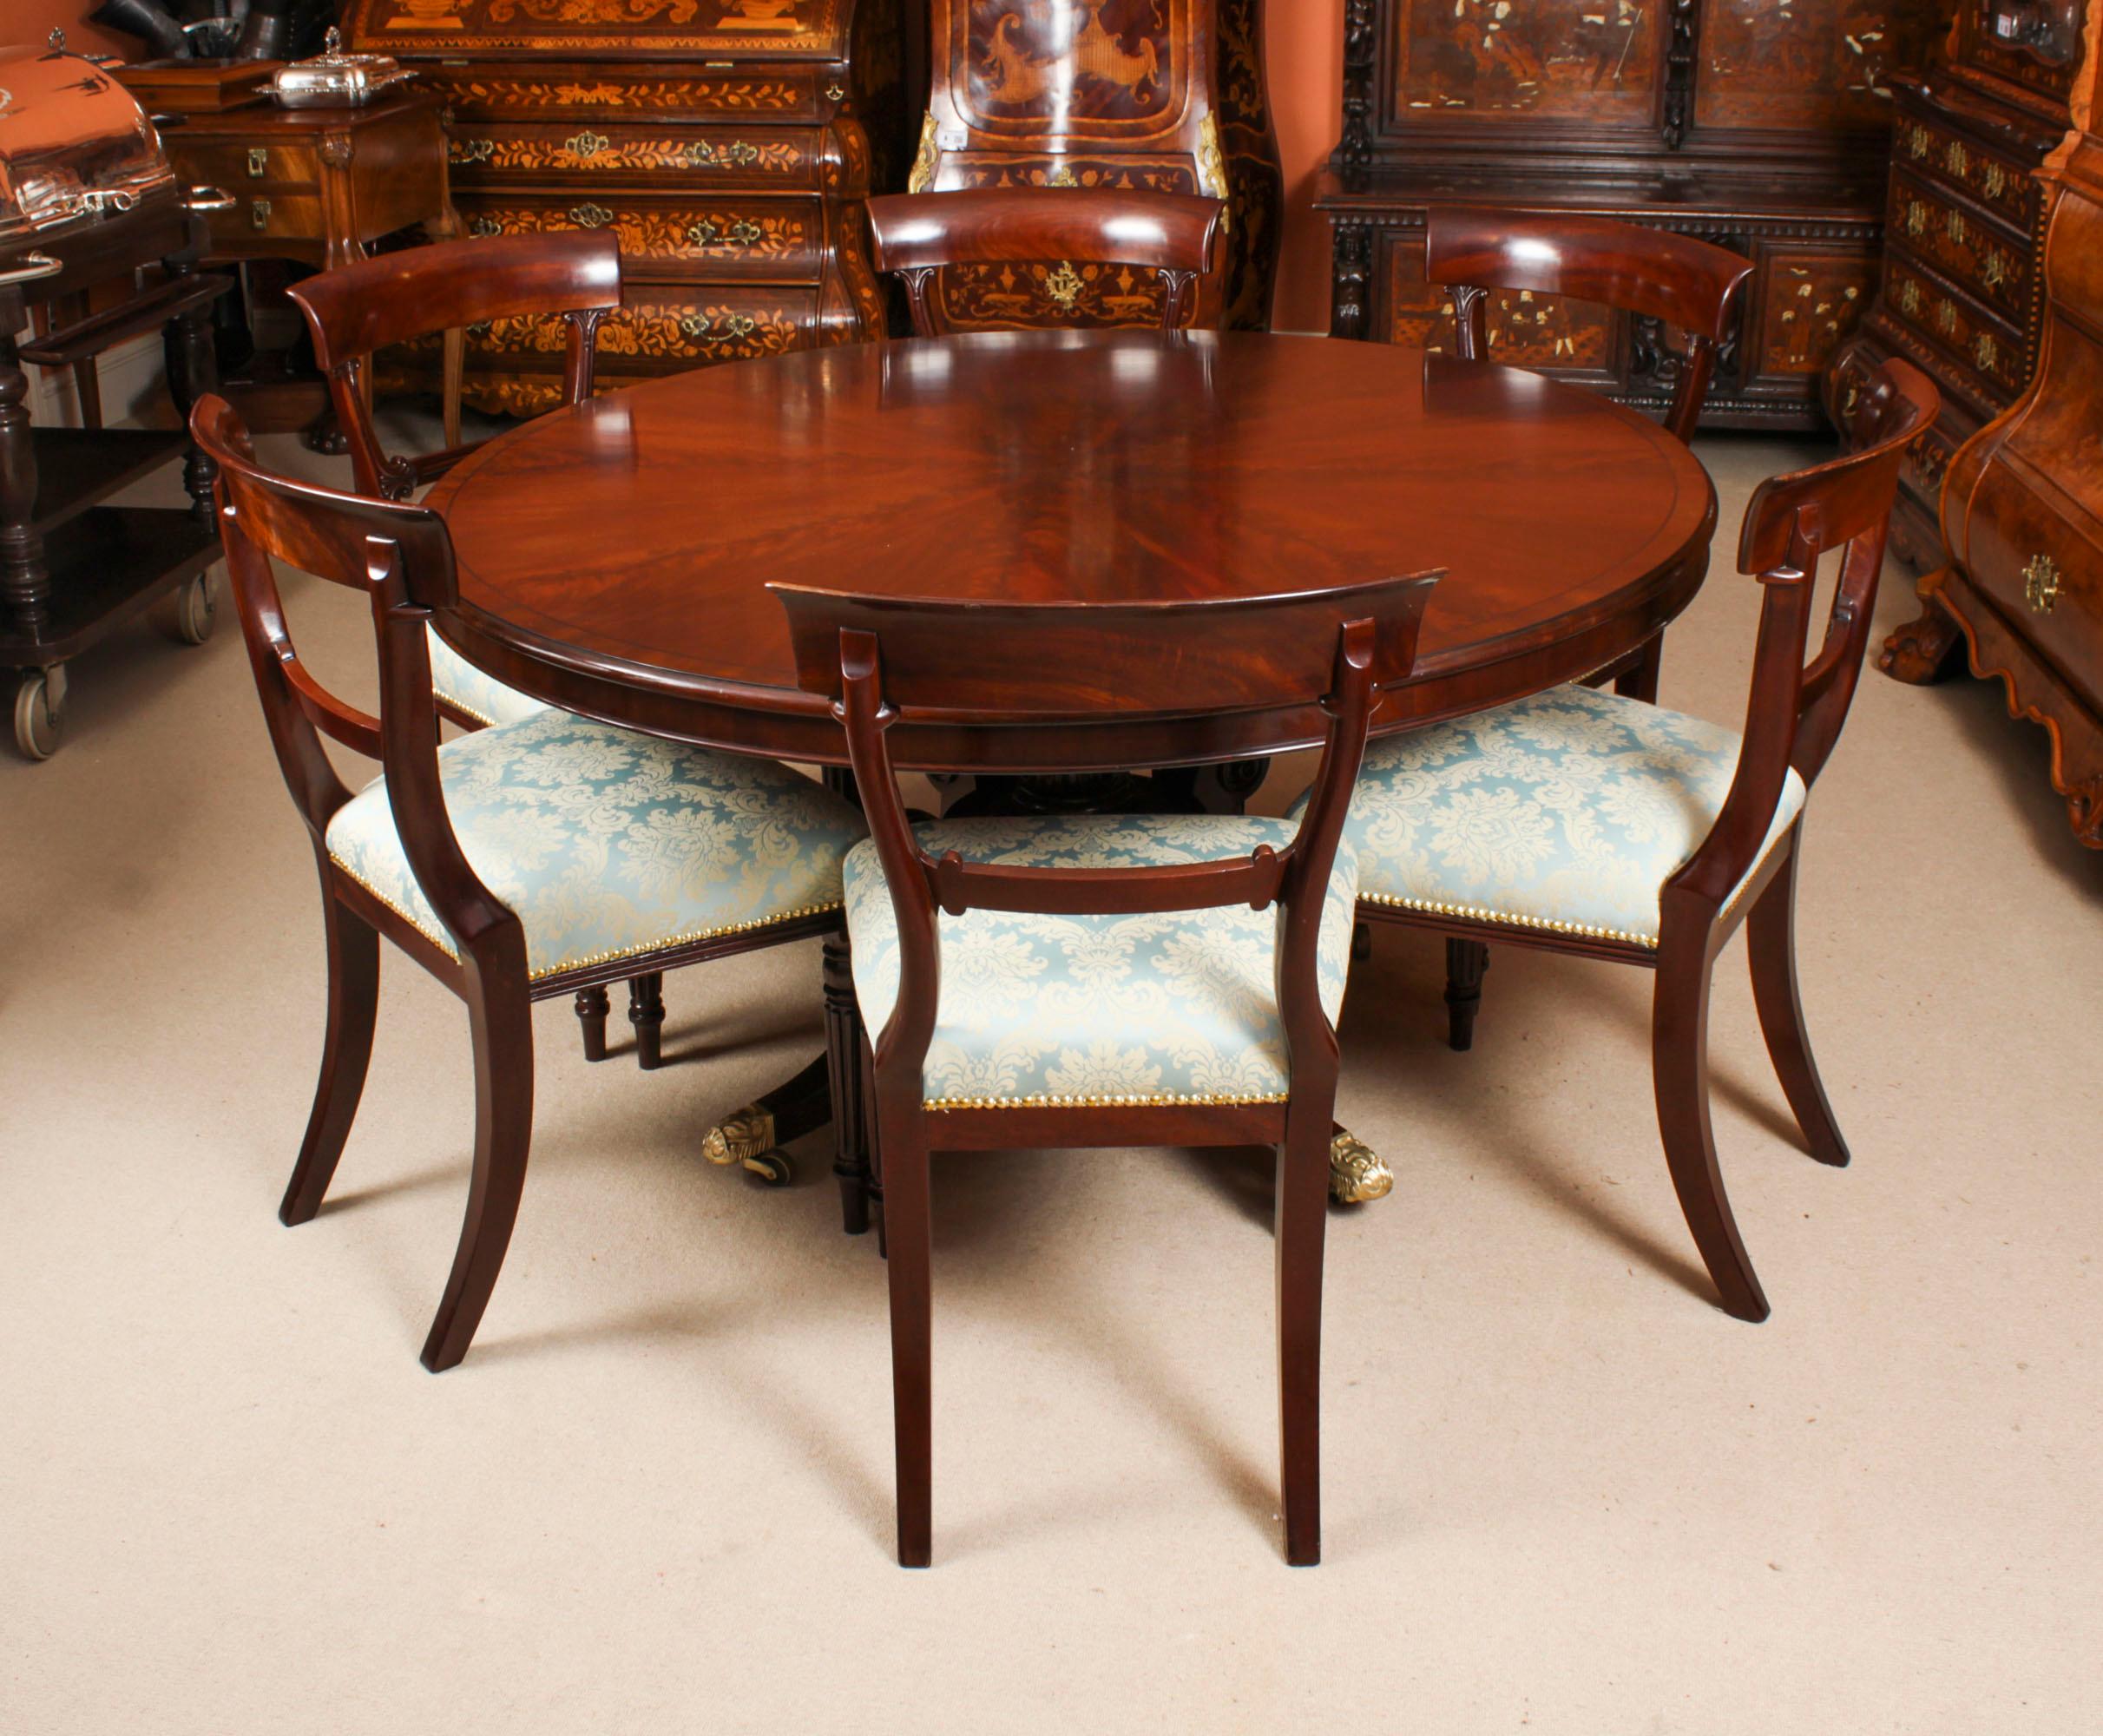 English Antique William IV Loo Breakfast Dining Table c.1830 19th C For Sale